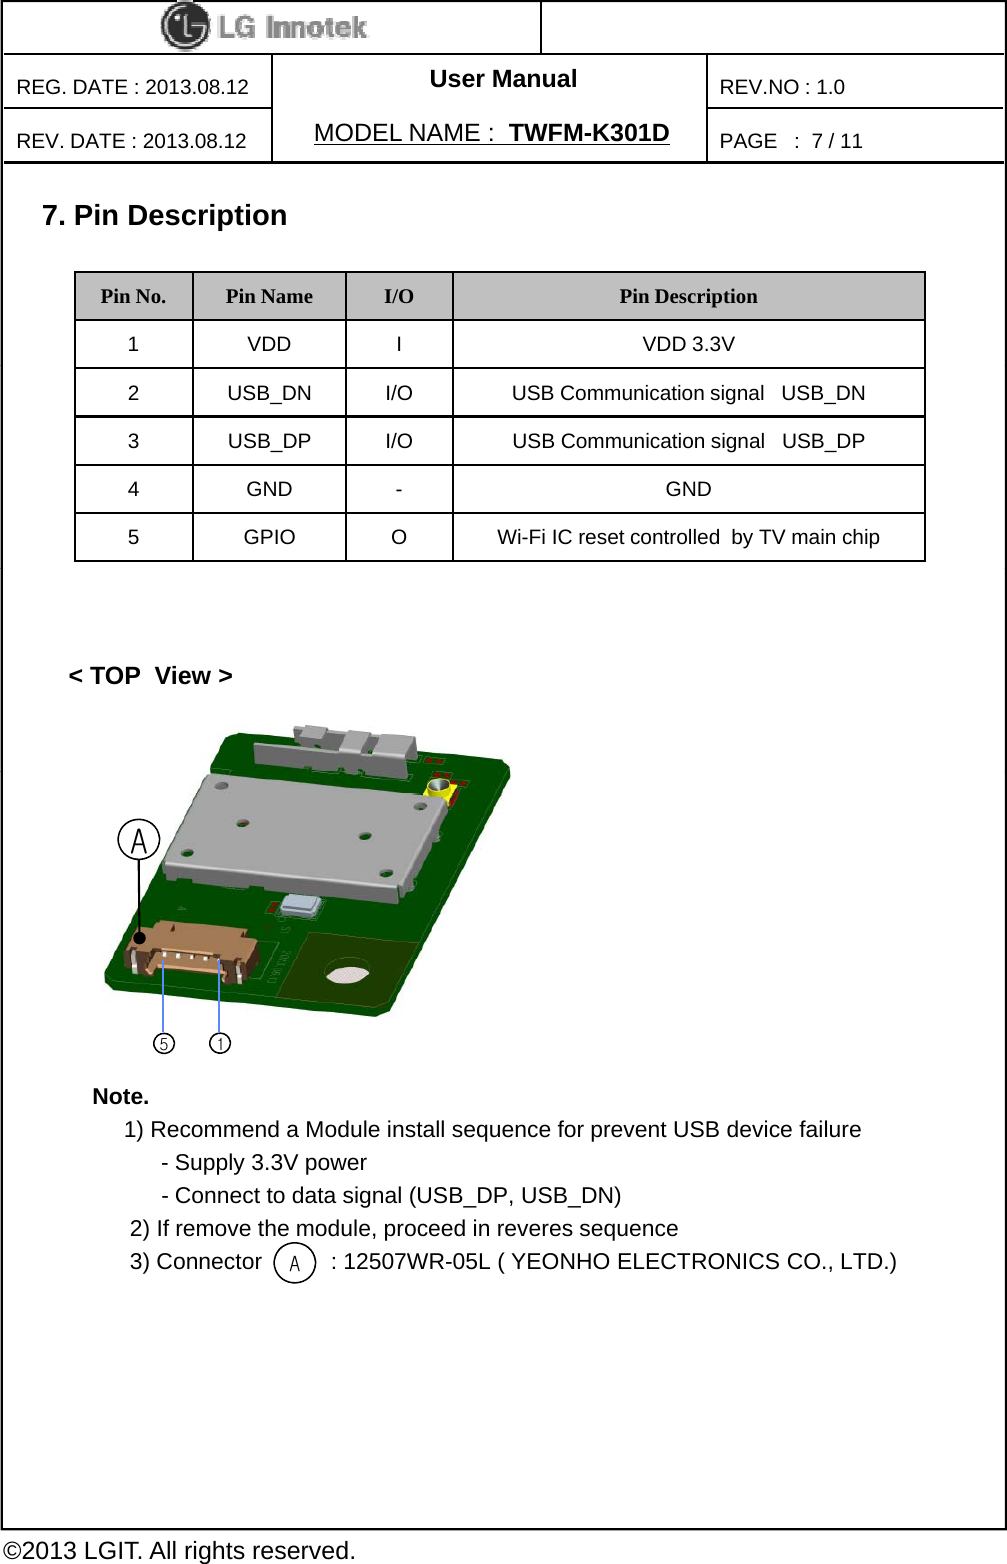 User ManualPAGE   :REG. DATE : 2013.08.12MODEL NAME : TWFM-K301DREV. DATE : 2013.08.12REV.NO : 1.07/ 117. Pin DescriptionPin No. Pin Name I/O Pin Description1 VDD I VDD 3.3V2 USB_DN I/O USB Communication signal   USB_DN3 USB_DP I/O USB Communication signal   USB_DP4 GND - GND5 GPIO O Wi-Fi IC reset controlled  by TV main chip&lt; TOP  View &gt;ANote.1) Recommend a Module install sequence for prevent USB device failure- Supply 3.3V power 15- Connect to data signal (USB_DP, USB_DN)2) If remove the module, proceed in reveres sequence3) Connector           : 12507WR-05L ( YEONHO ELECTRONICS CO., LTD.)A©2013 LGIT. All rights reserved.